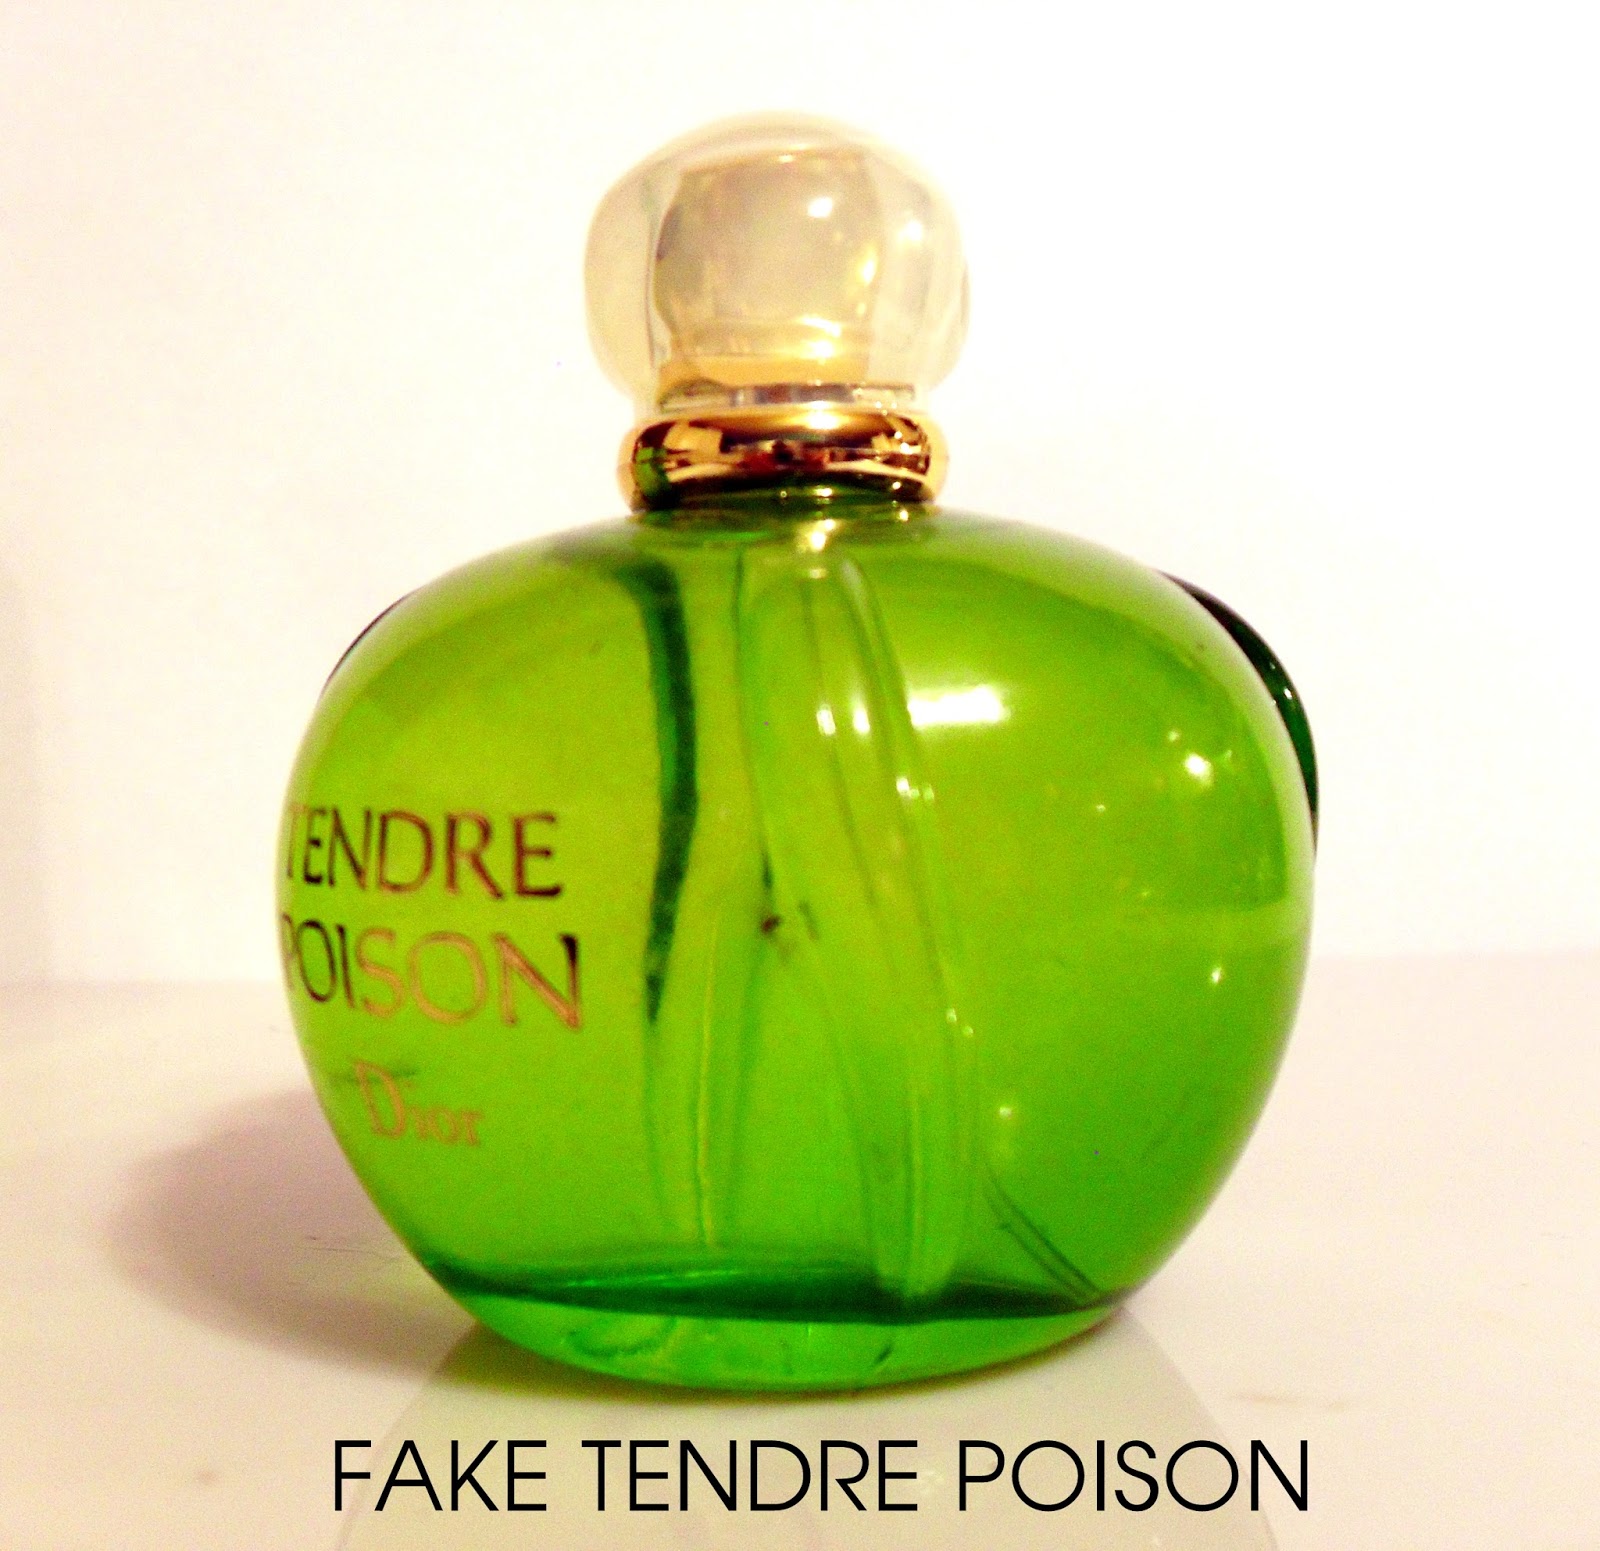 dior tendre poison discontinued